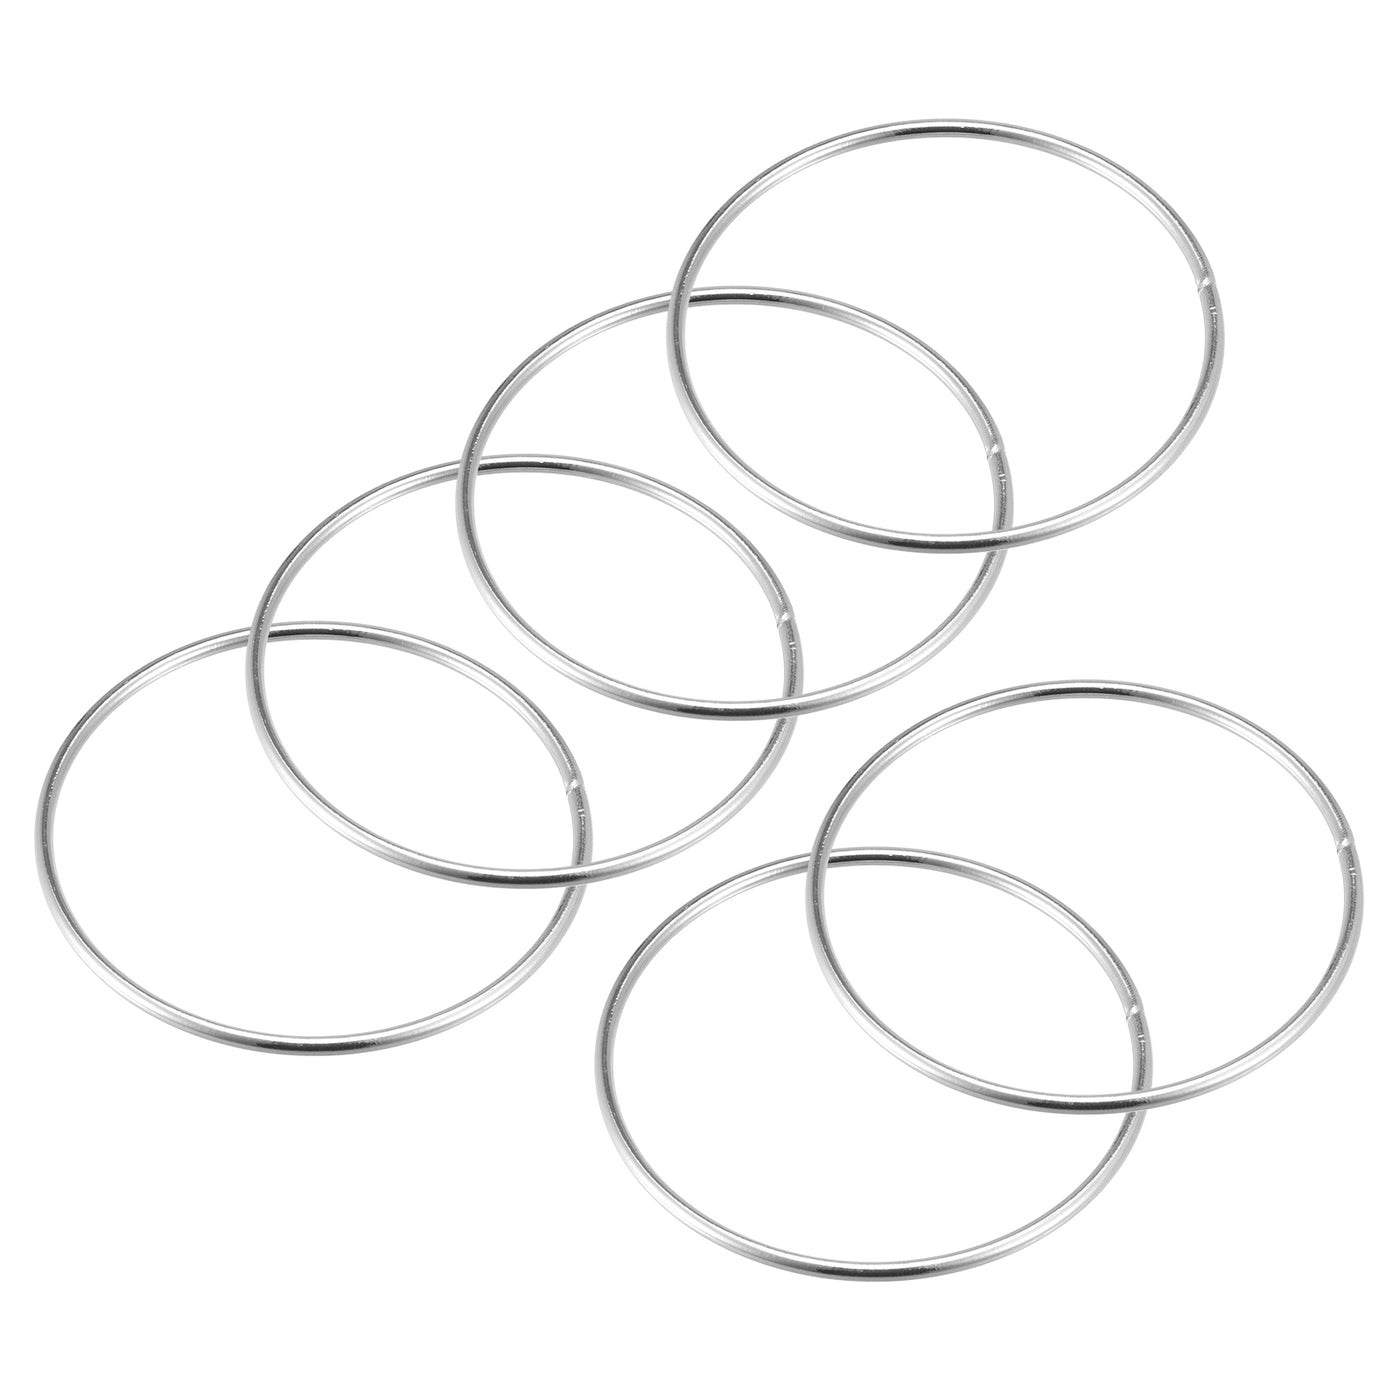 Uxcell Uxcell 75mm(2.95") OD Metal O Ring Non-Welded Craft Hoops for DIY Silver Tone 12pcs